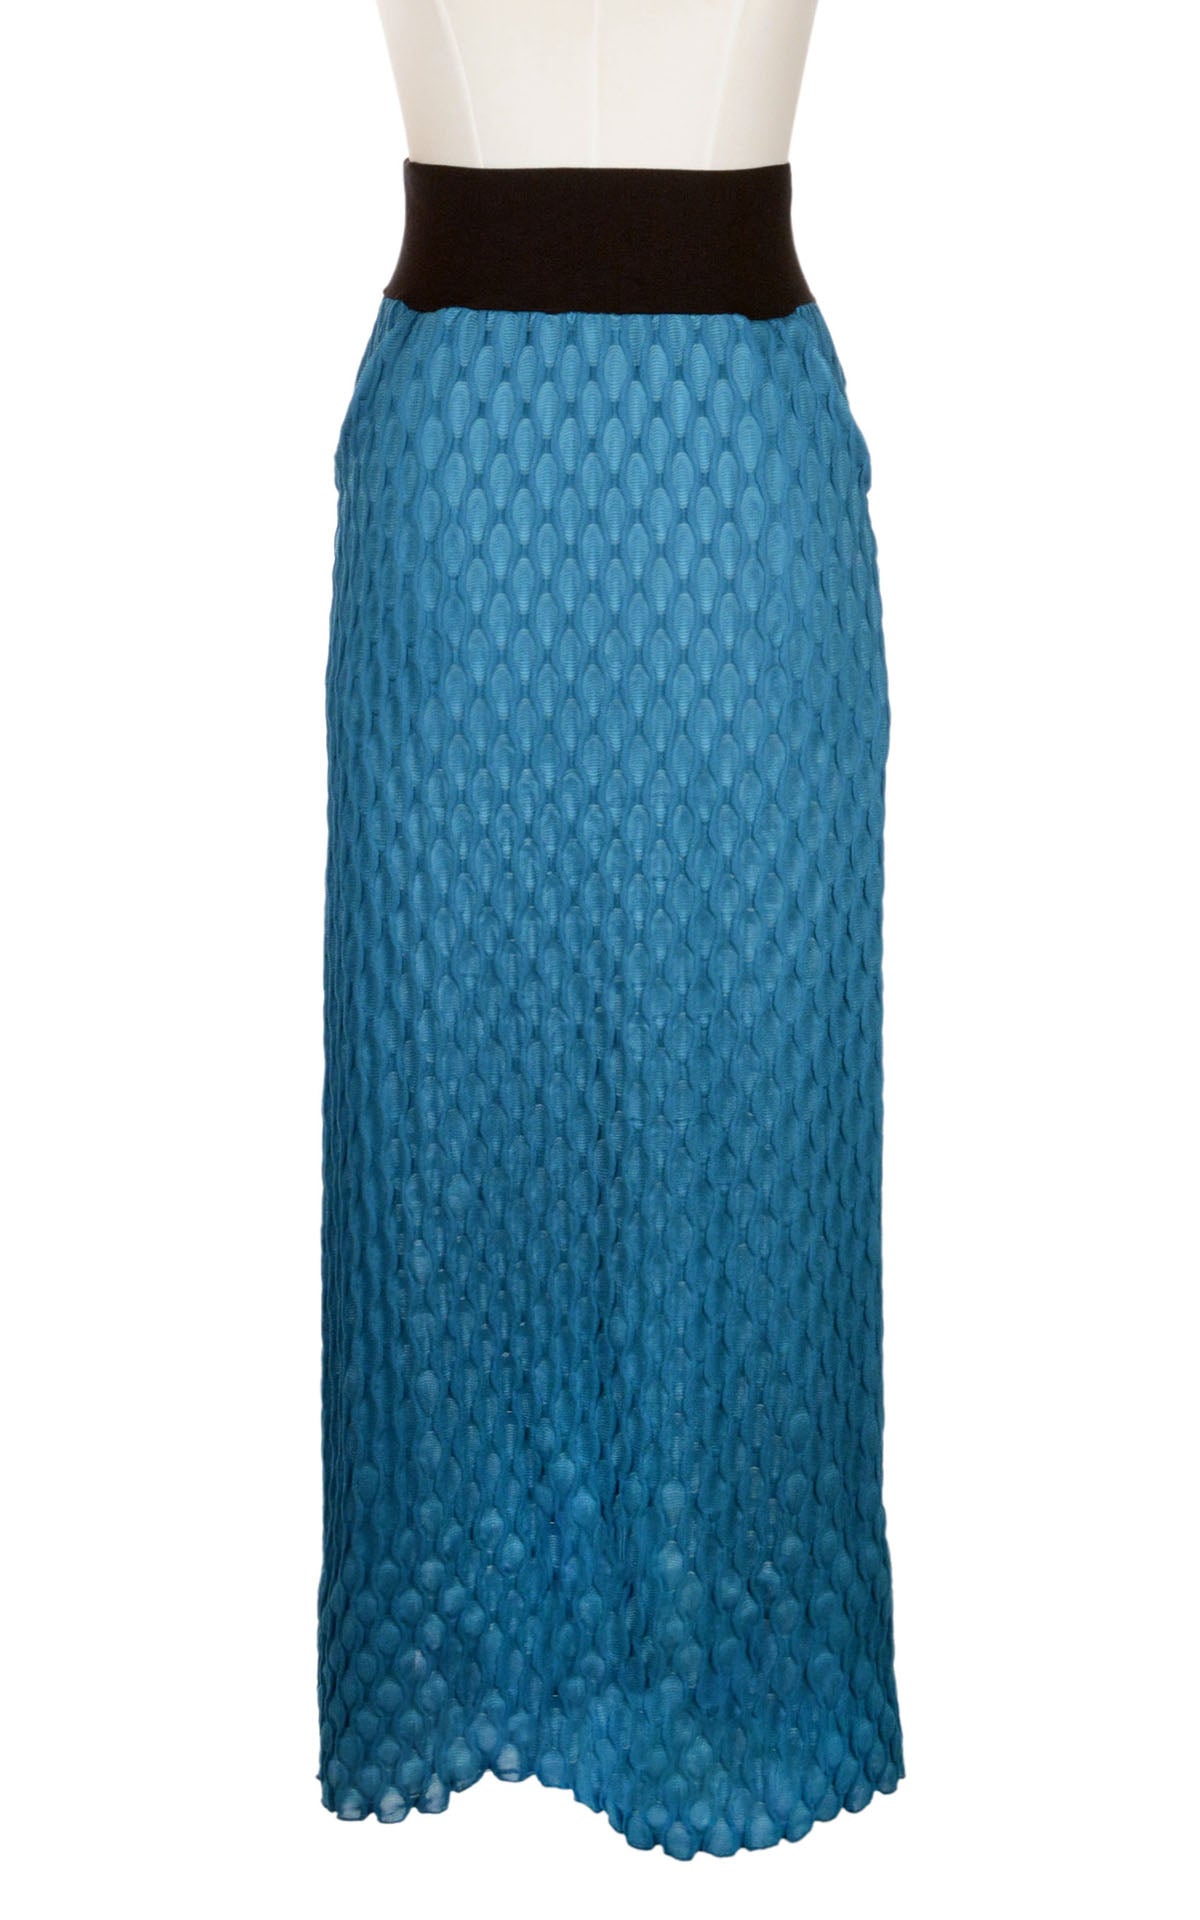 Product photo of A-Line Skirt in Cerulean Blue, from the LYC/Pandemonium Seattle Fractal Collection. Handmade in Seattle, WA, USA.